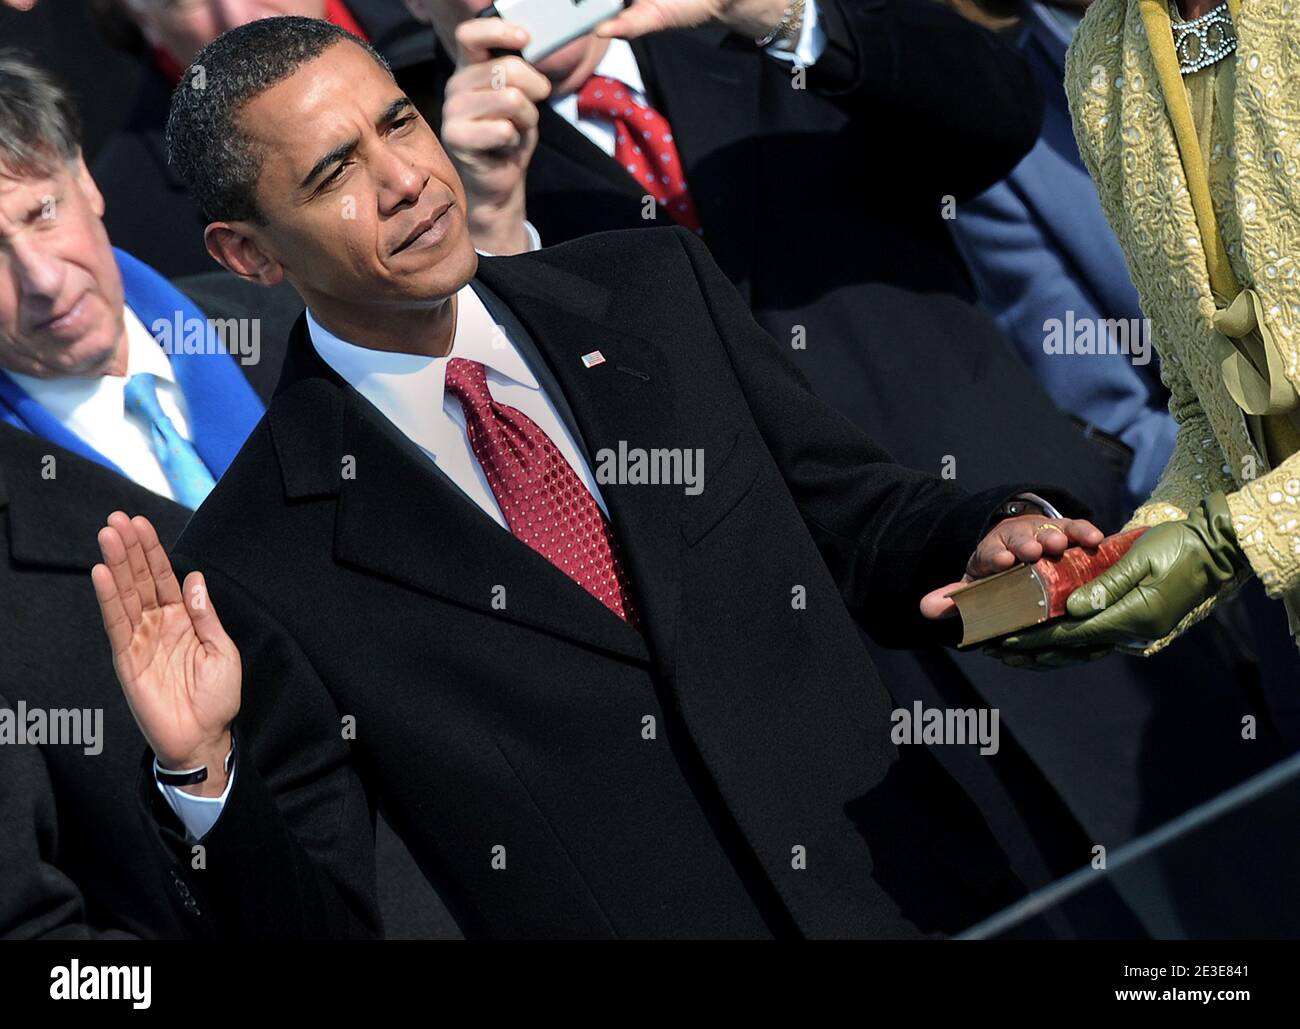 U.S. President Barack Obama along with his family, wife Michelle and daughters Malia and Sasha takes the Oath of Office from Supreme Court Chief Justice John Roberts to become the 44th U.S. President and the first African-American elected, during the Inauguration ceremonies on Capitol Hill in Washington, D.C., USA on January 20, 2009. Photo by Douliery/Hahn/ABACAPRESS.COM Stock Photo